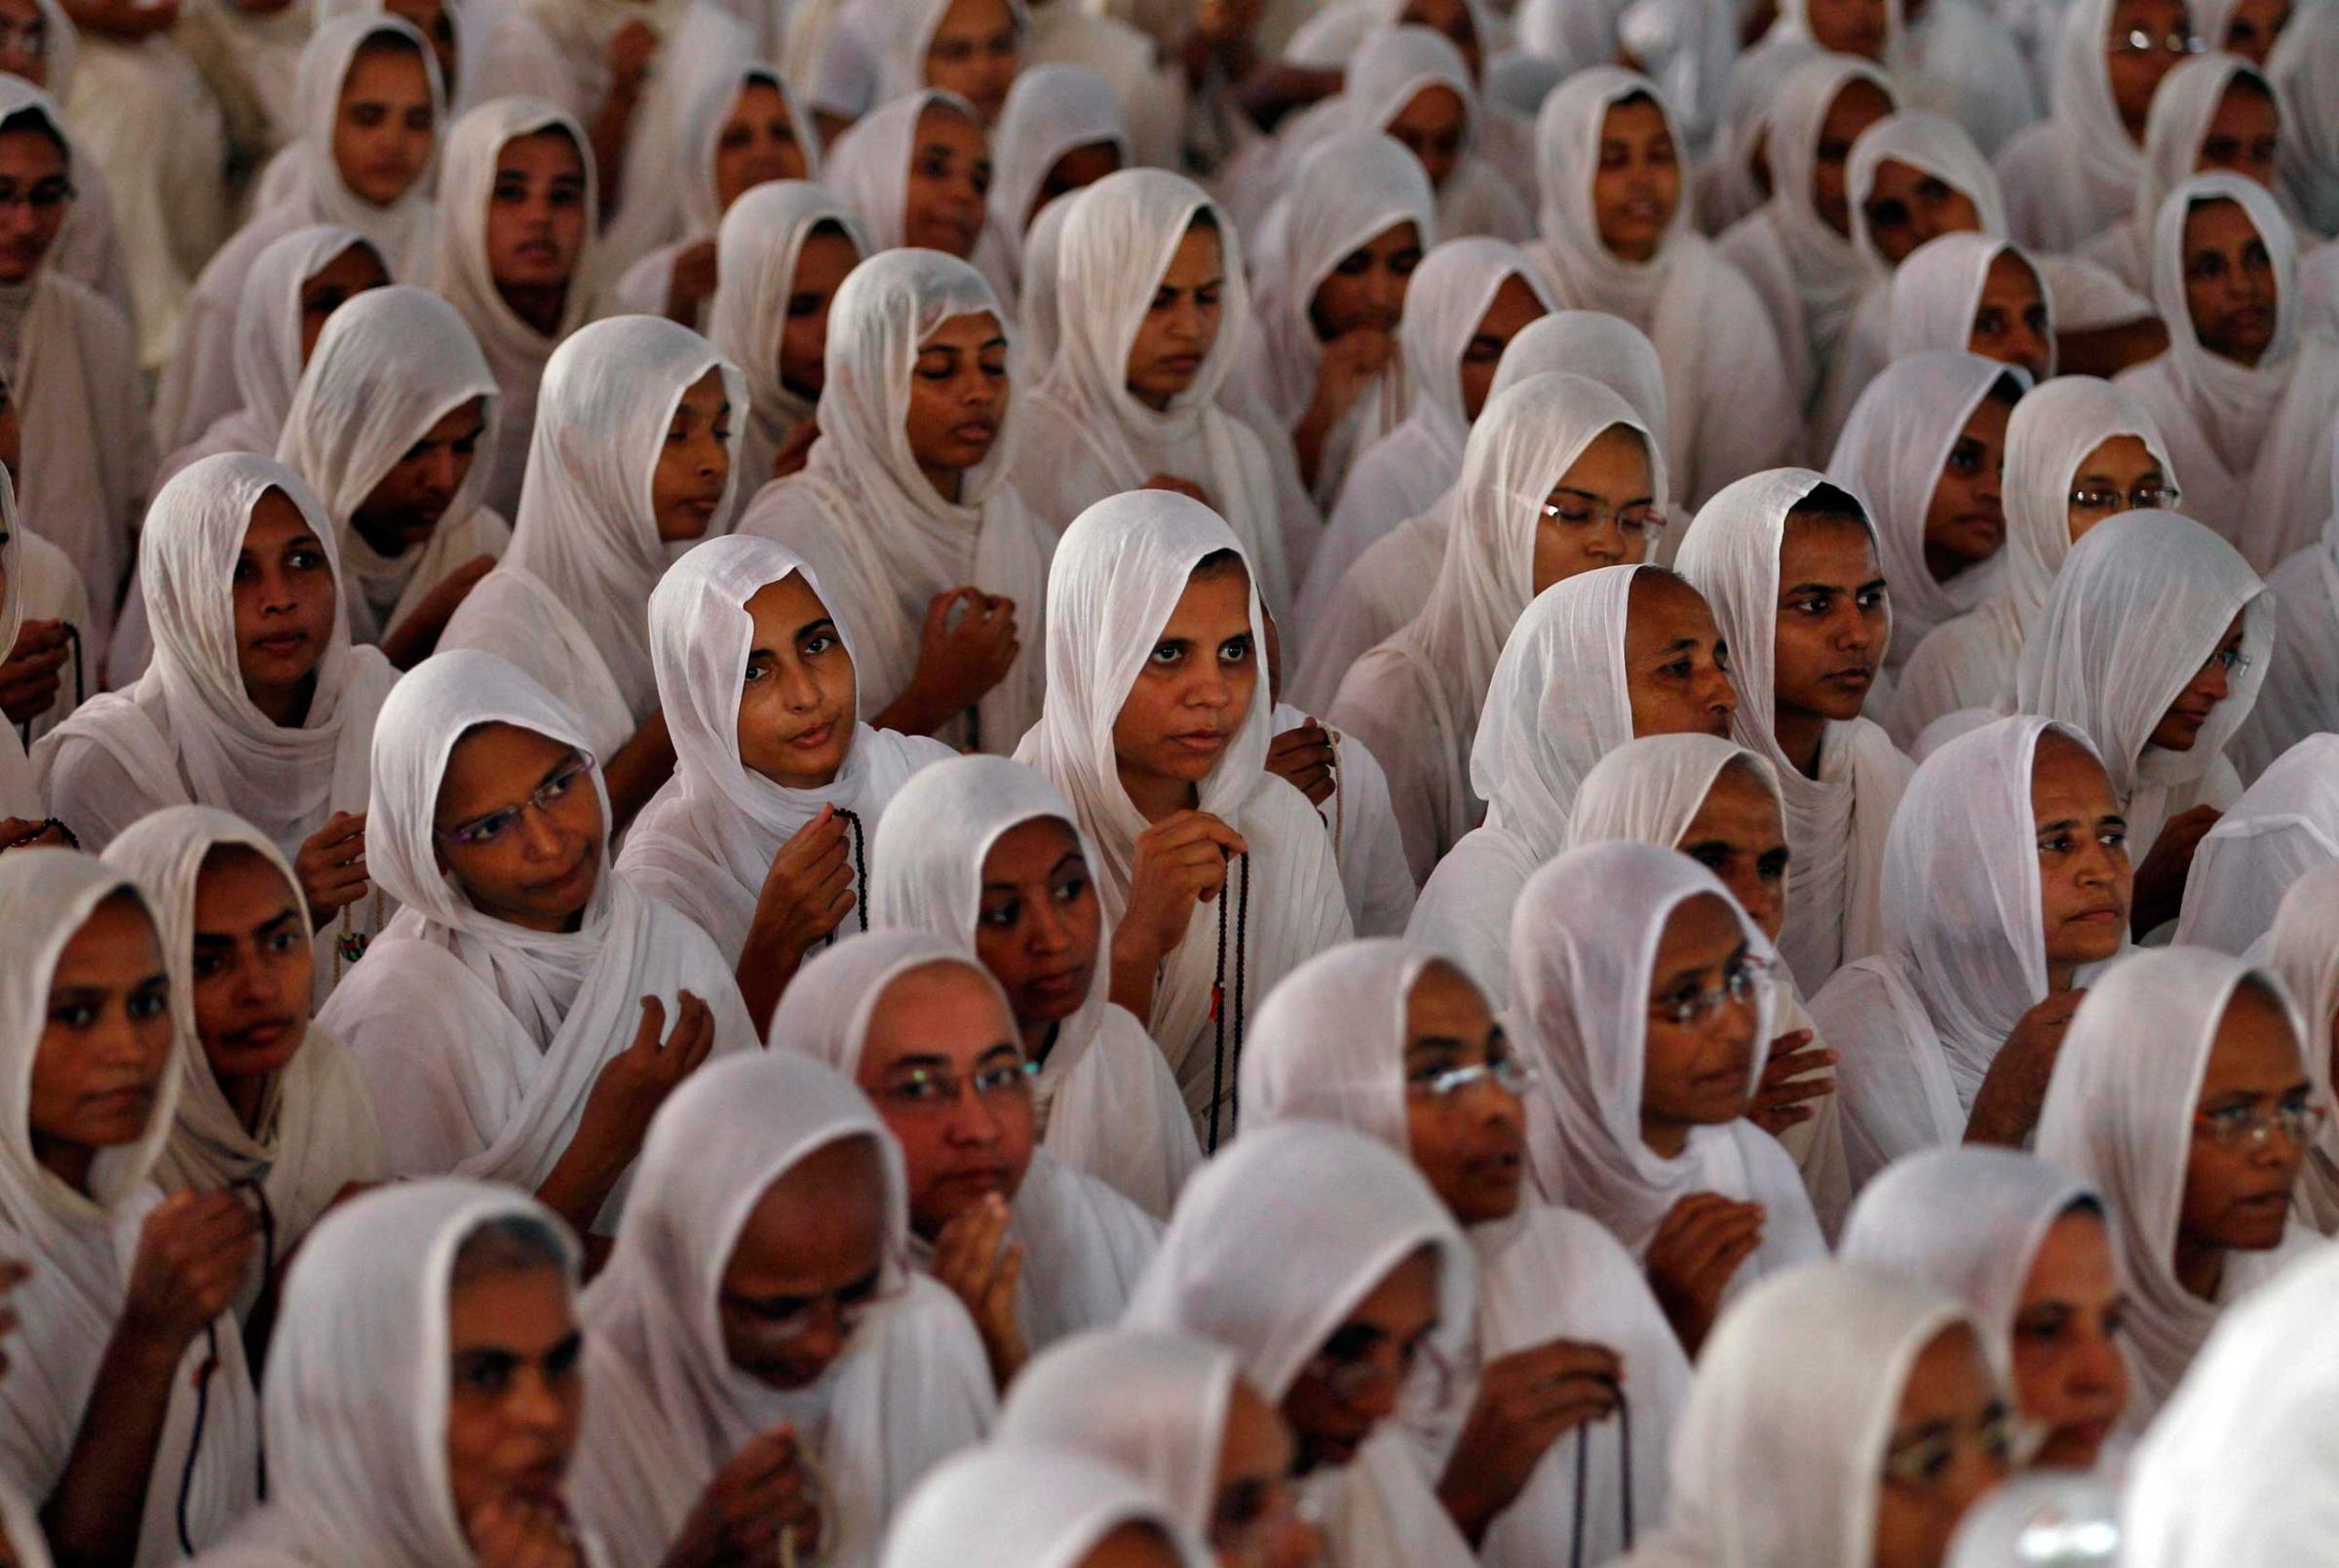 Women from the Jain community attend a prayer meeting for world peace in Ahmedabad